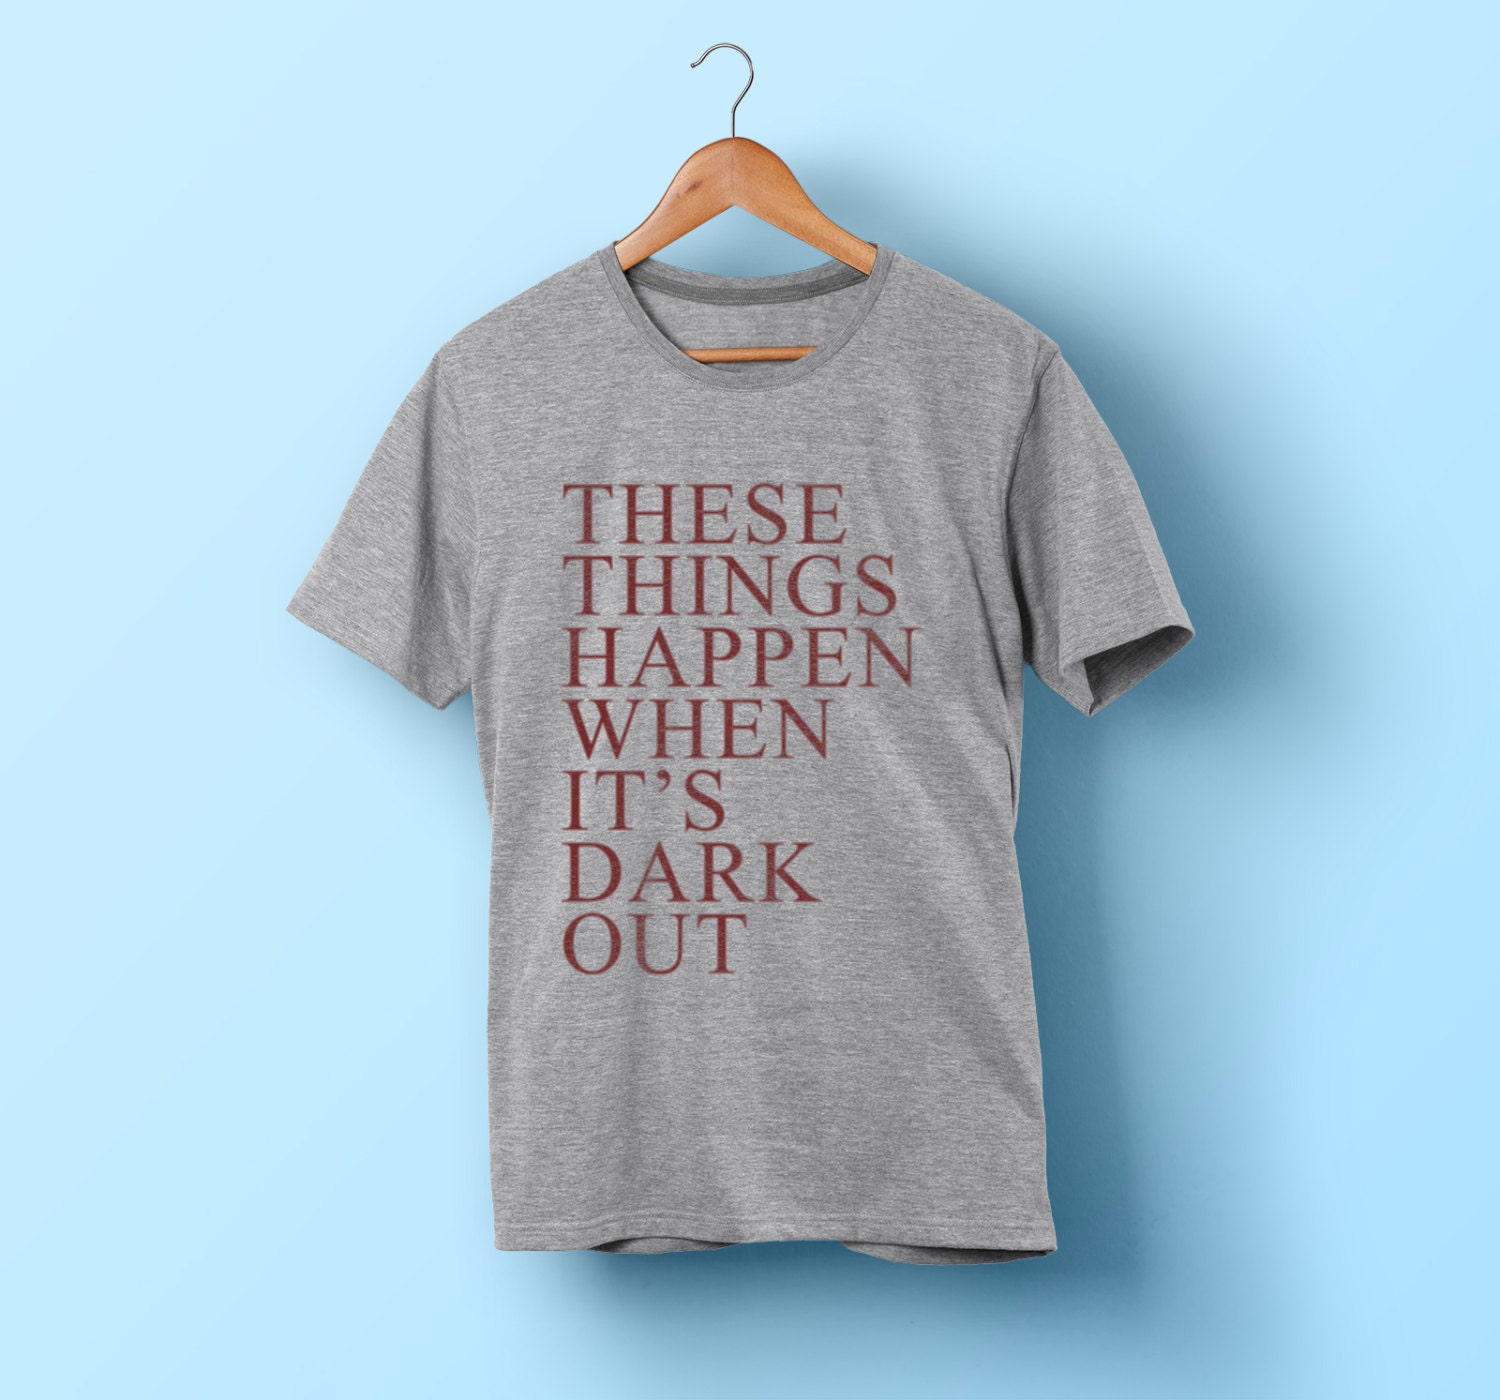 When It's Dark Out G Eazy T Shirt by CapitalLaundry on Etsy